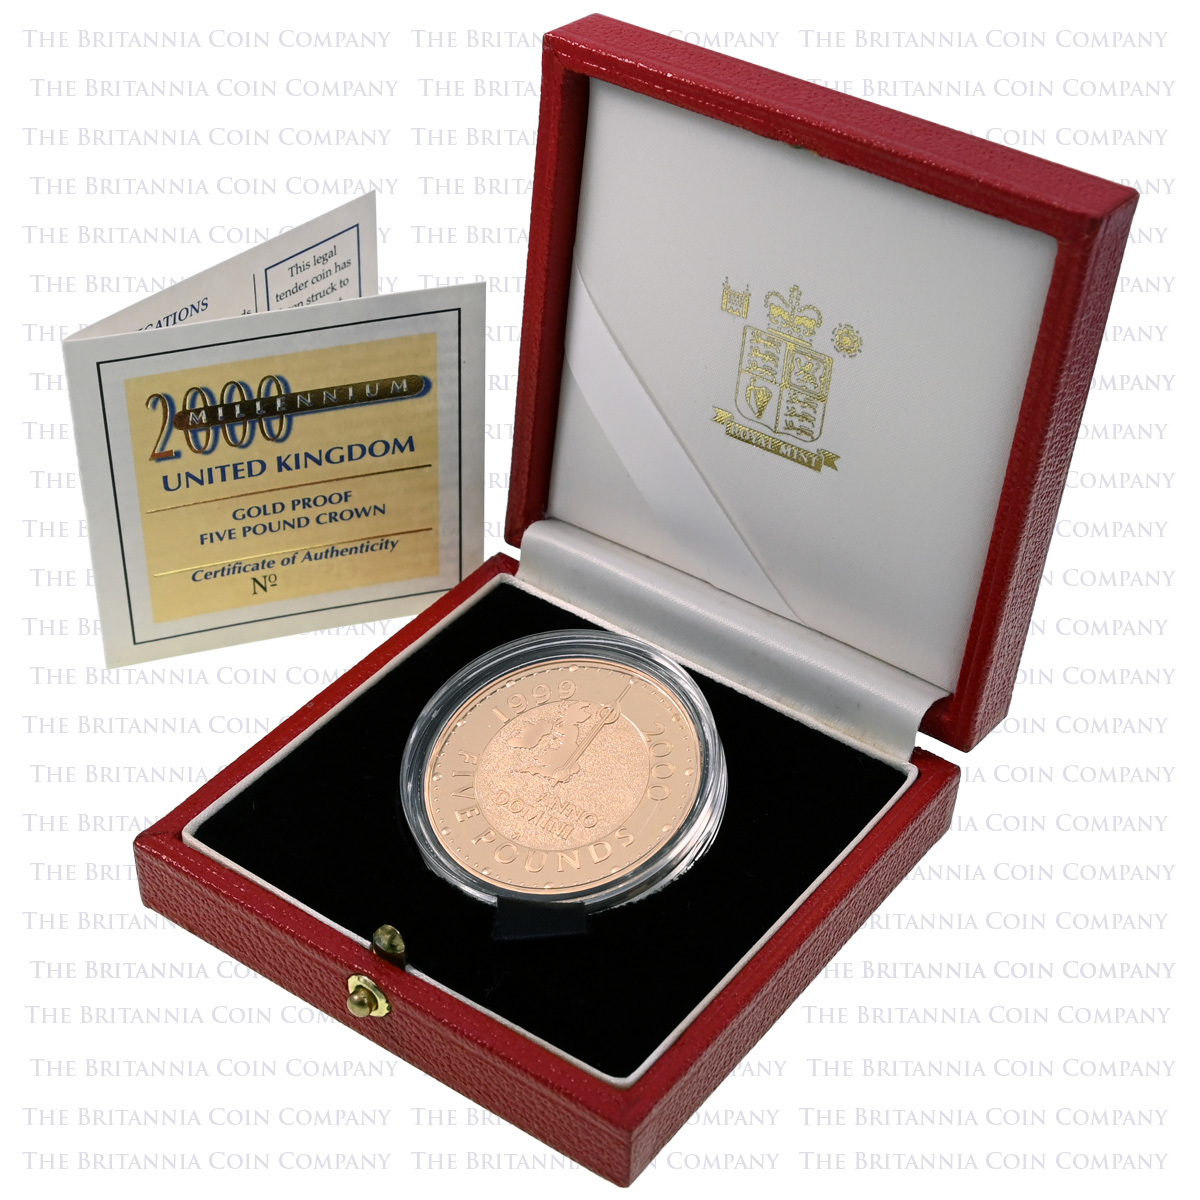 1999 Millennium Five Pound Crown Gold Proof Coin Boxed